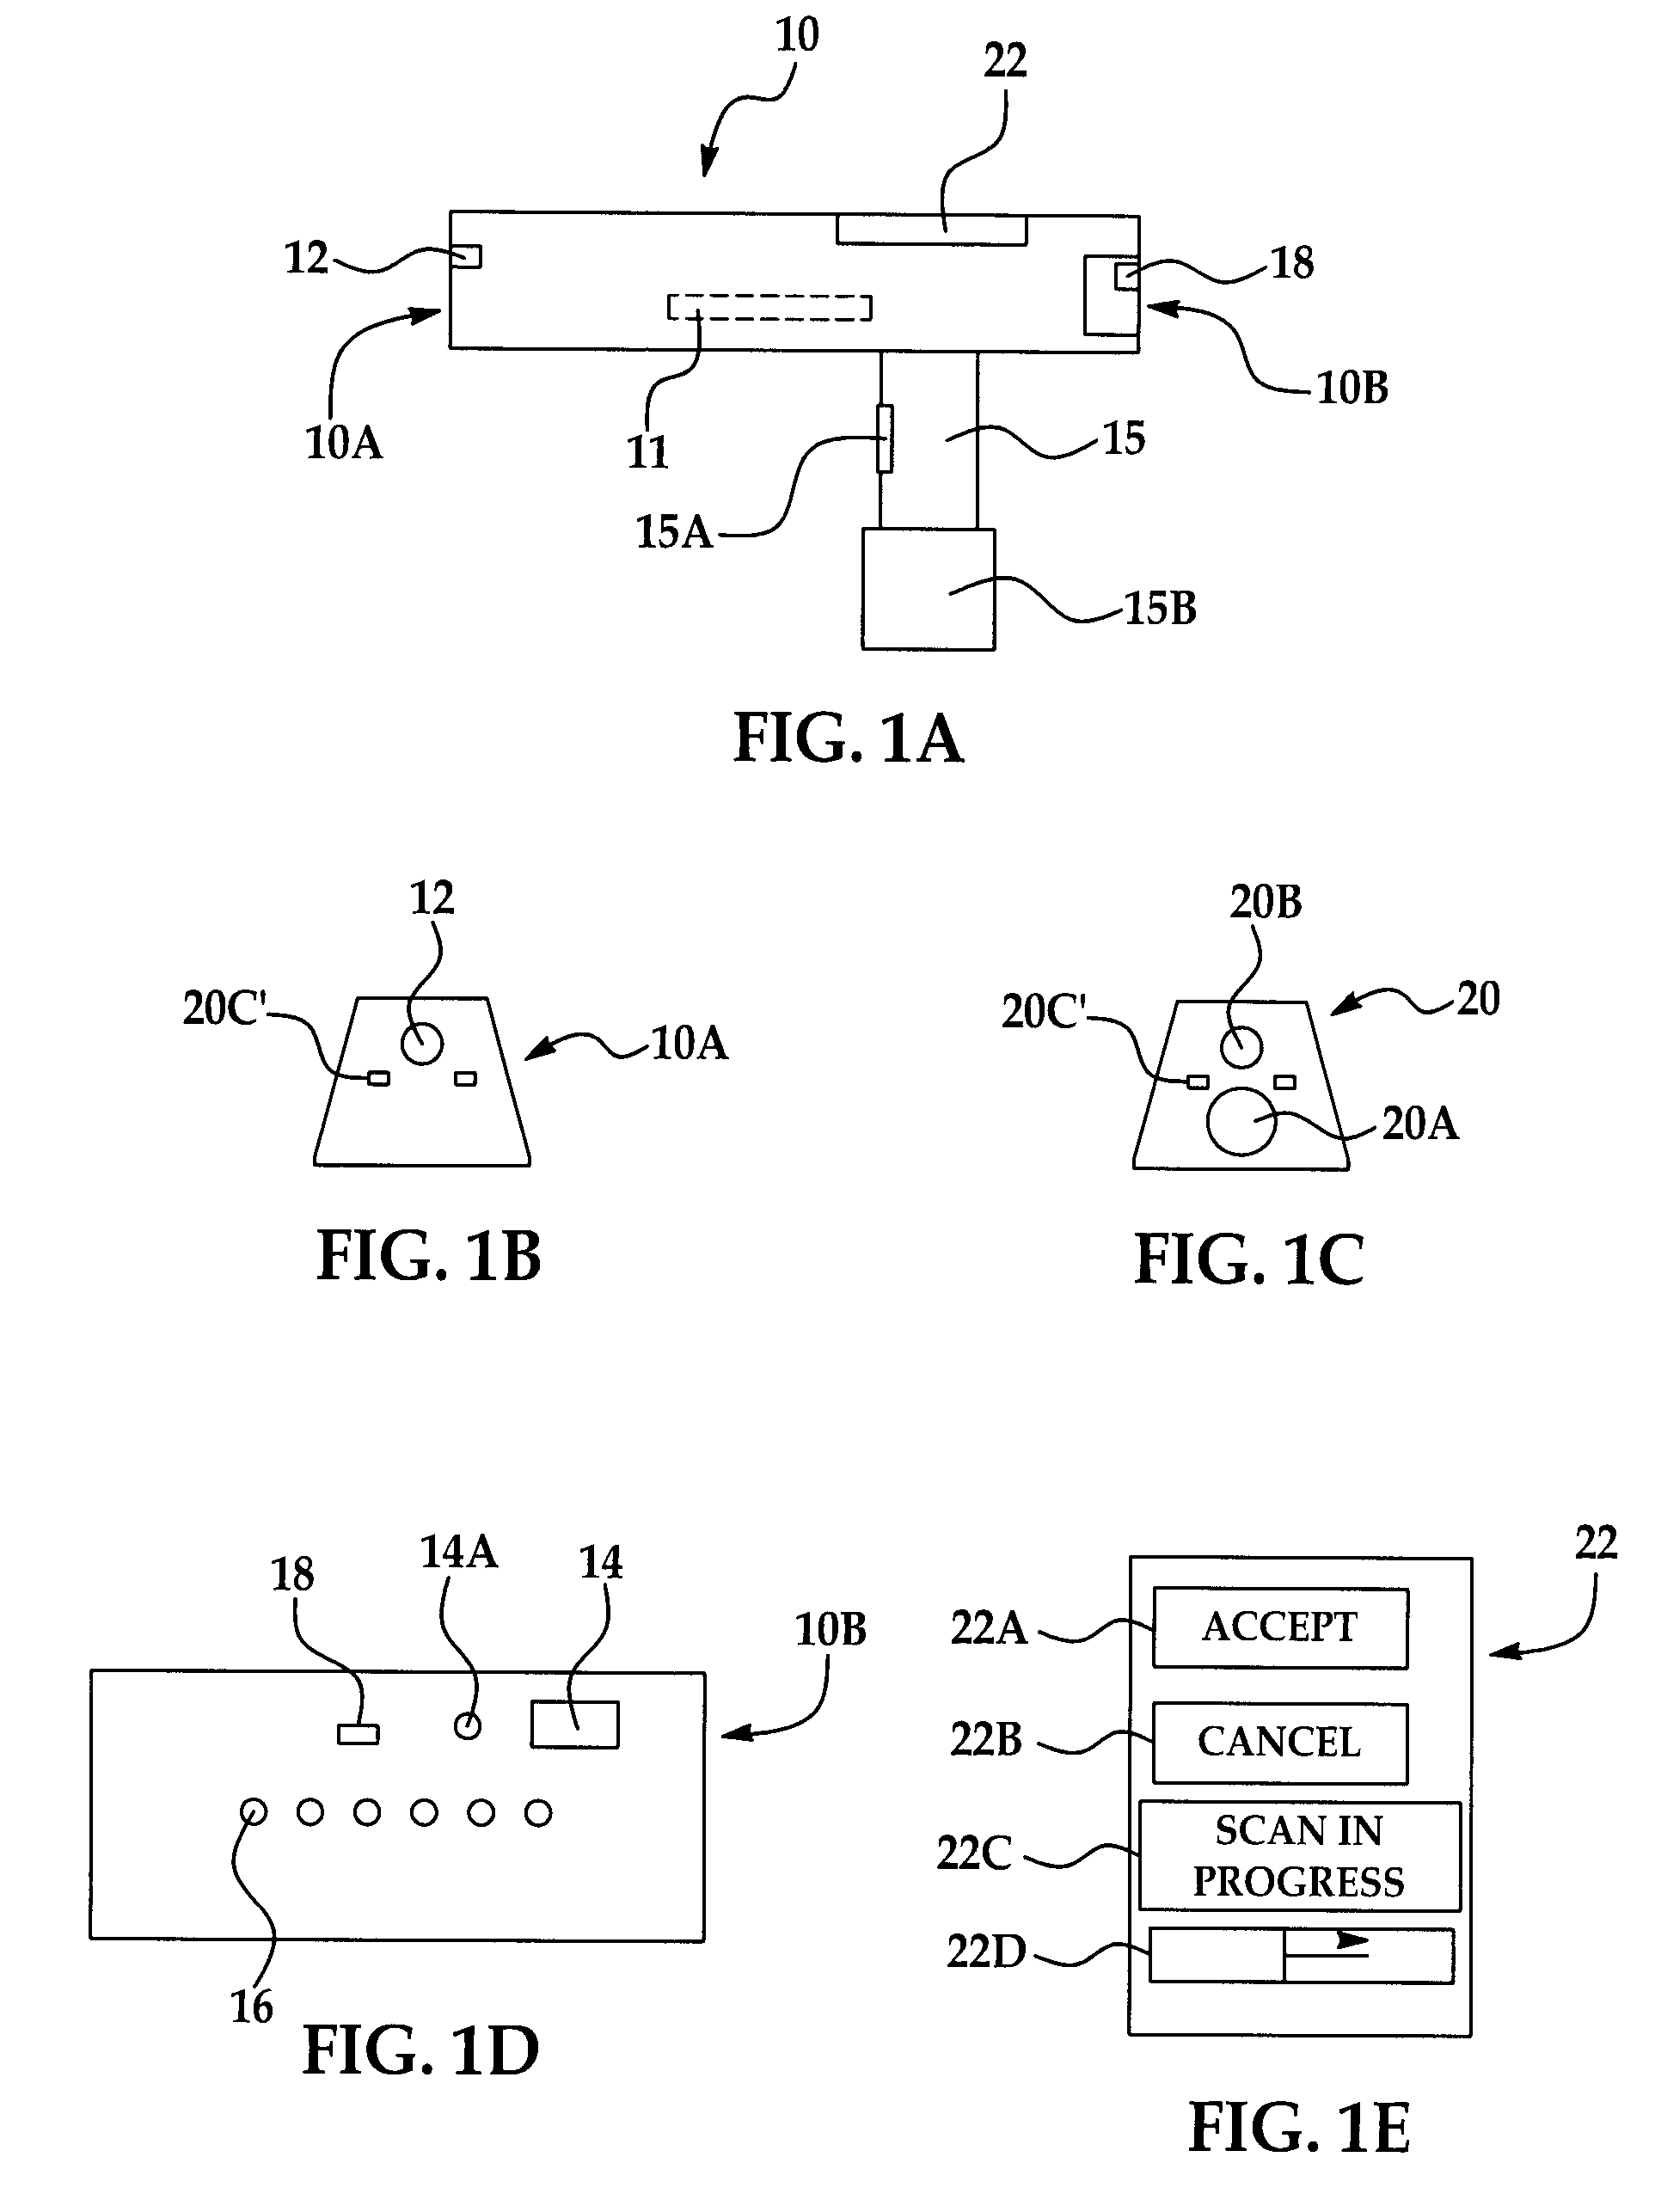 Sample Preparation and Methods for Portable IR Spectroscopy Measurements of UV and Thermal Effect